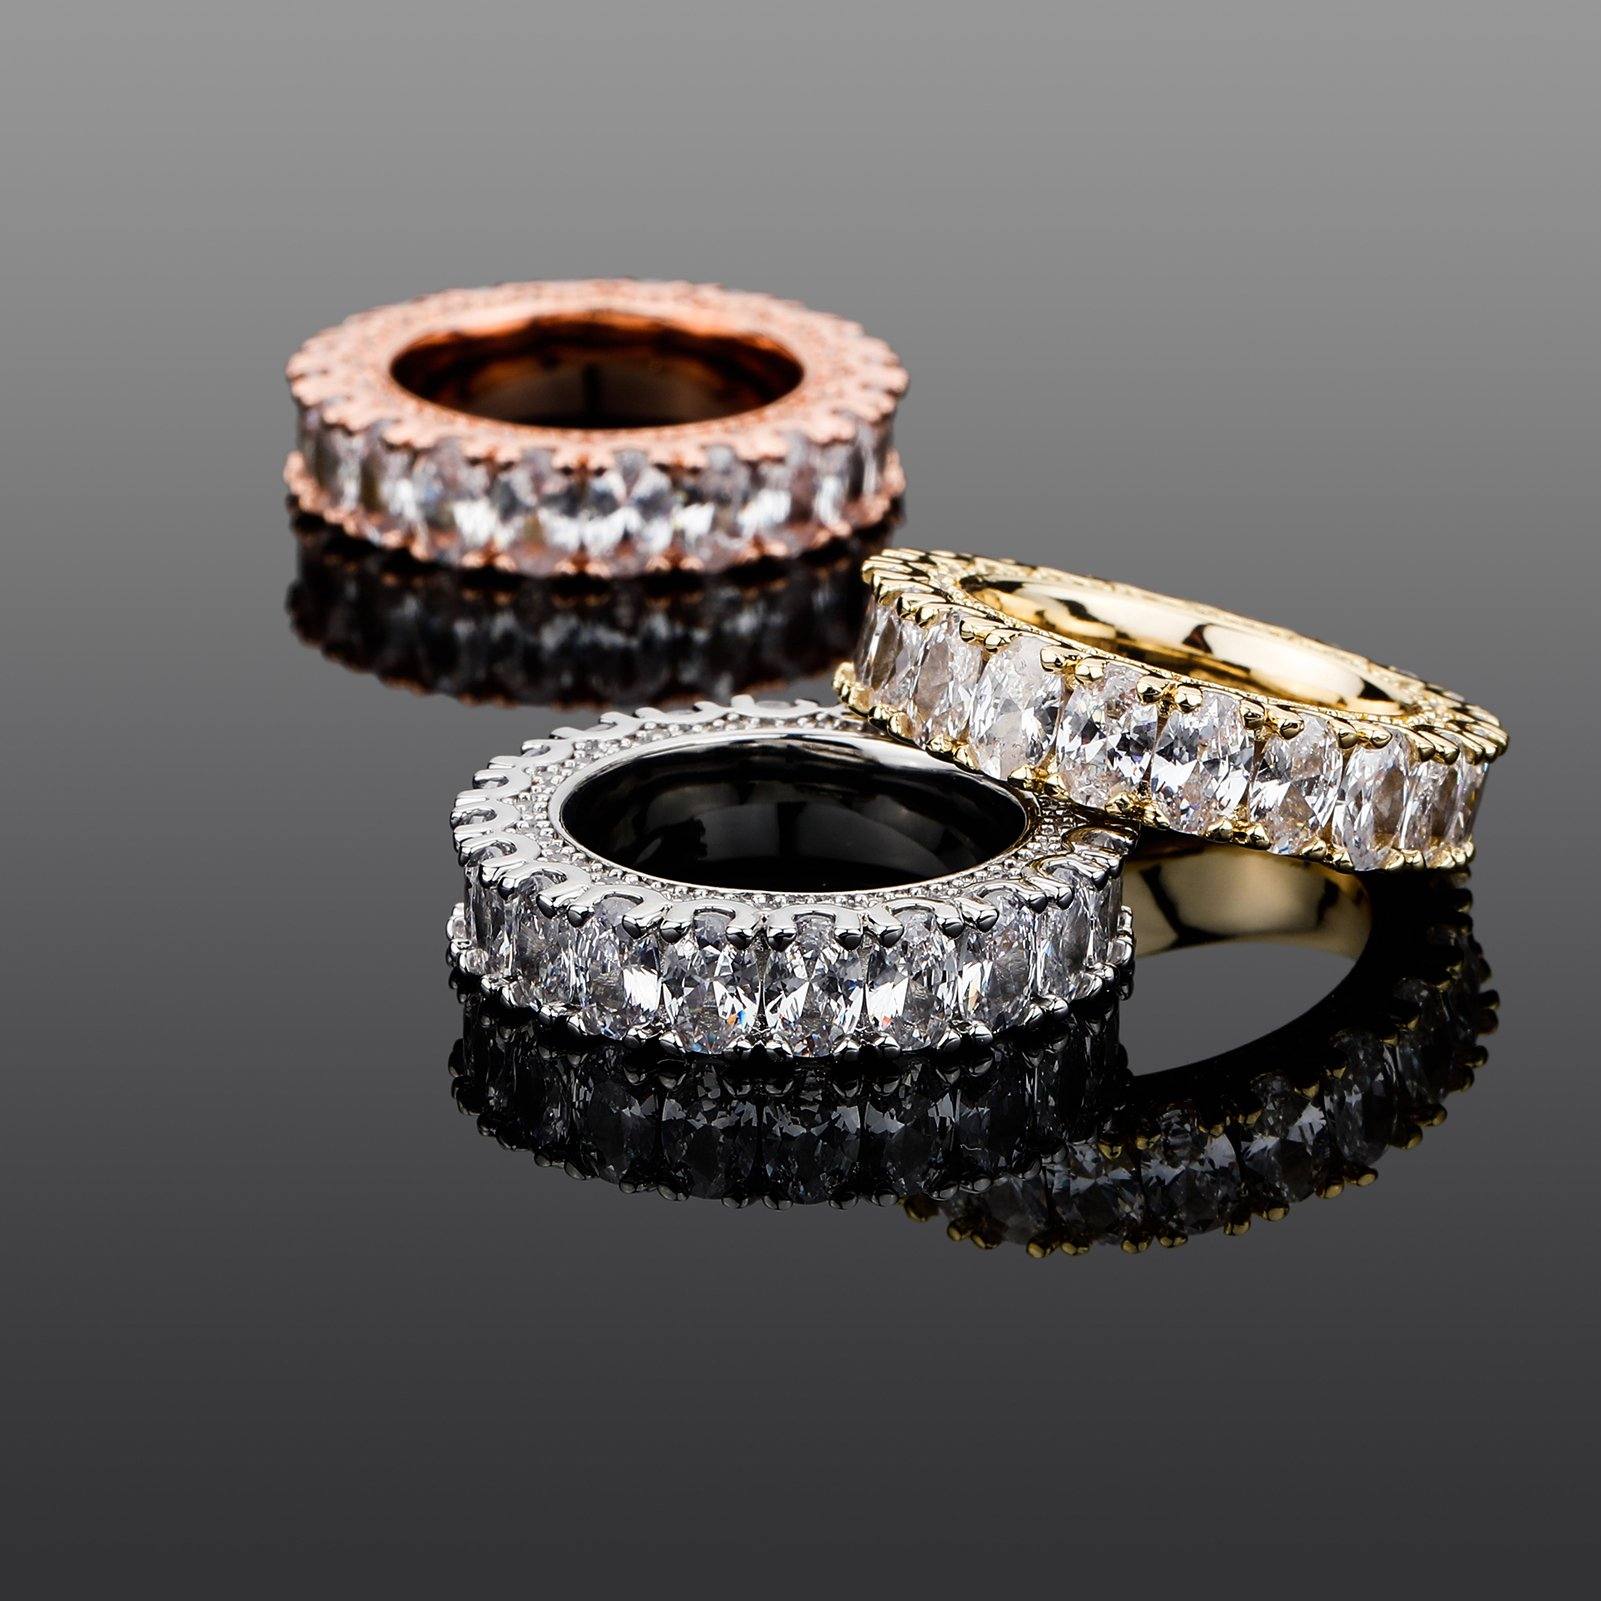 New Baguette Rings - Gold - Alliceonyou